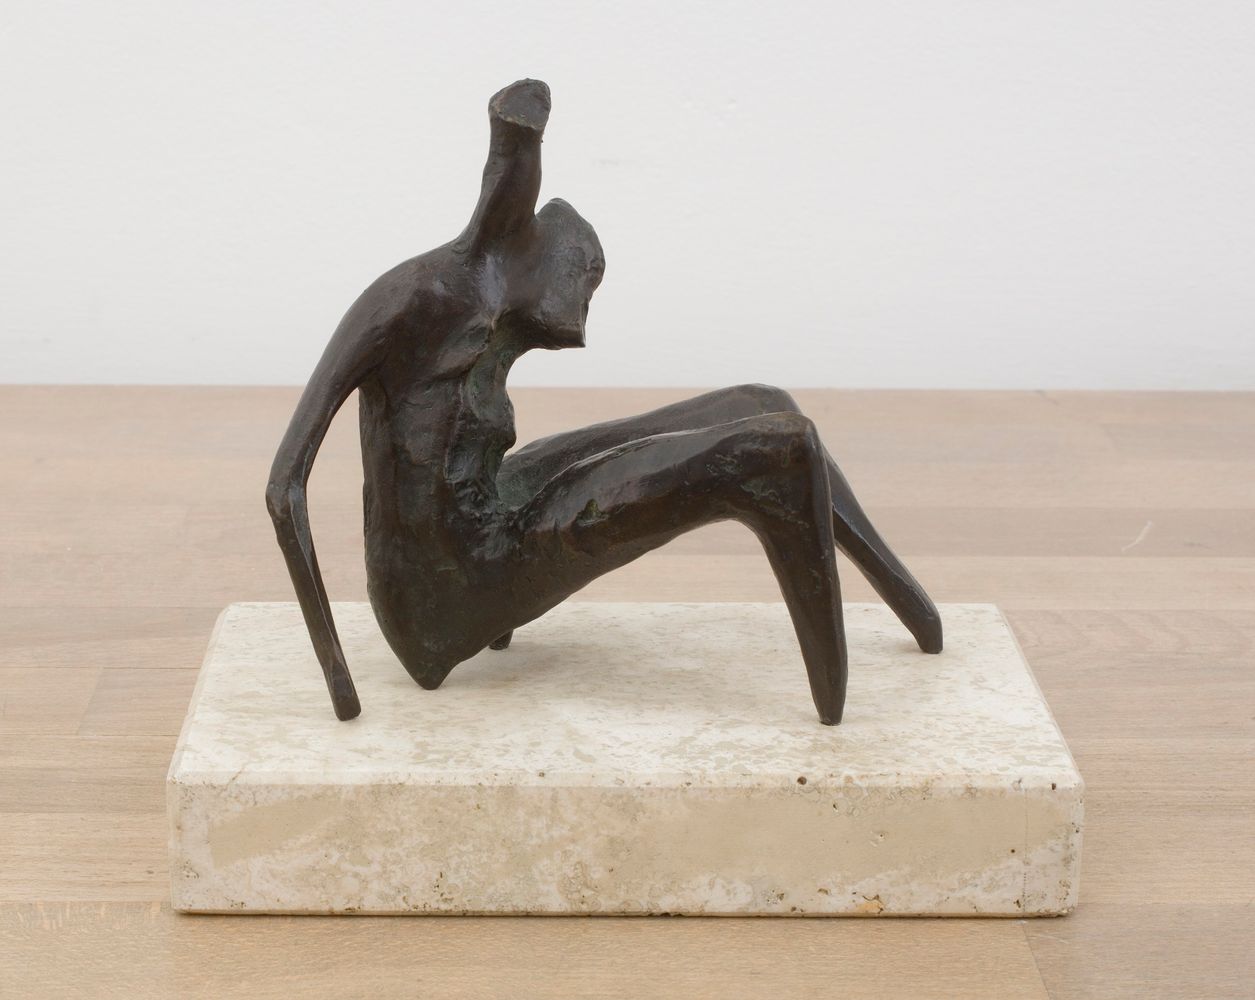 Maquette for Seated Torso, conceived in 1954, cast in 1956